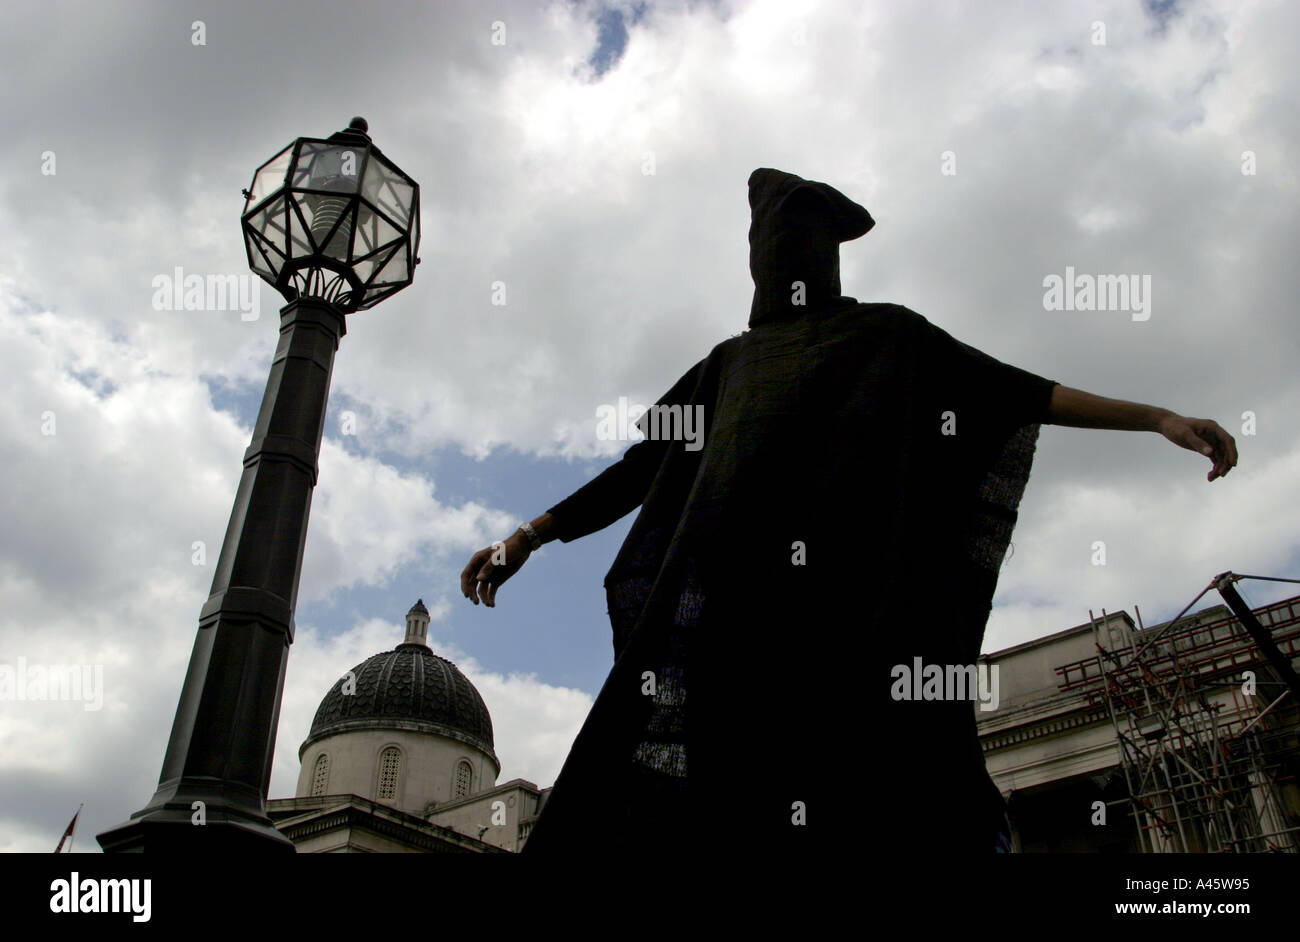 a protester poses as an abused abu ghreib prison inmate during a demonstration in london against the israeli governments building of a security wall around the west bank and gaza and the ongoing us and british occupation of iraq 15 may 2004 Stock Photo